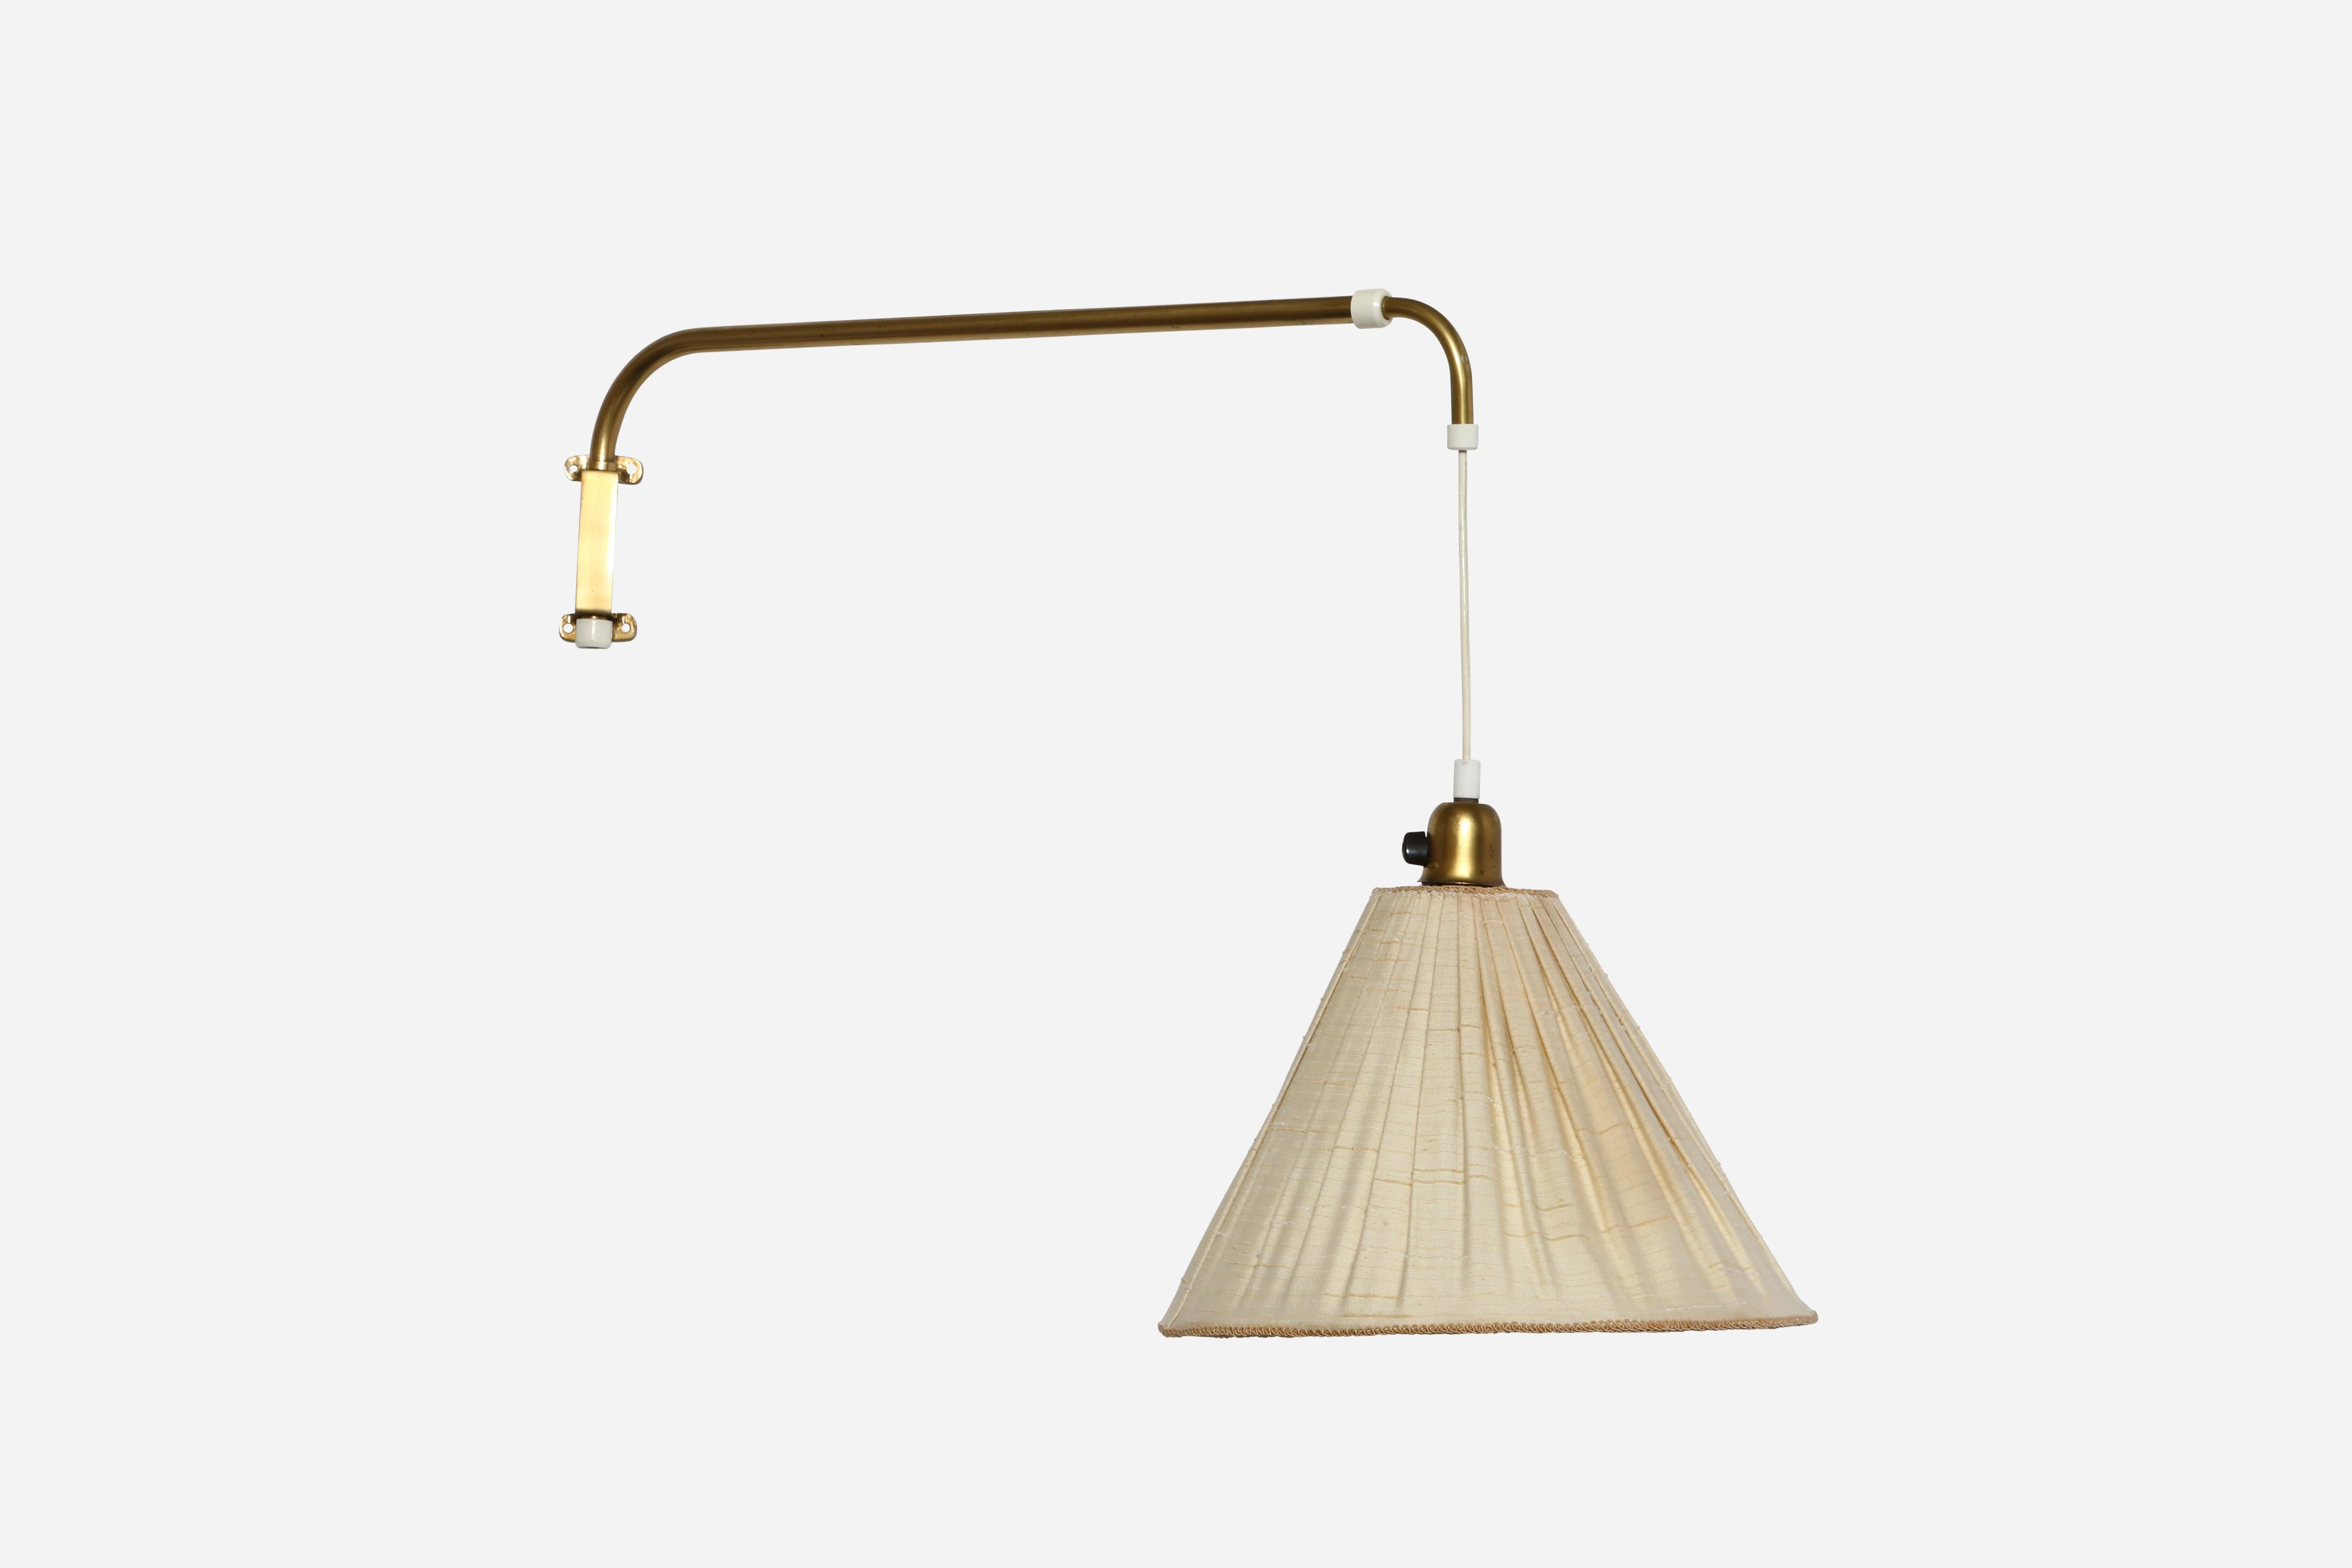 Telescopic extendable brass wall lamp.
Made in Sweden in 1940s
Original fabric shade.
The shortest length is 23 inches
Longest - 38 inches
Designed as plug-in with the cord.
Complimentary US rewiring upon request.
Shade is 14 inches in